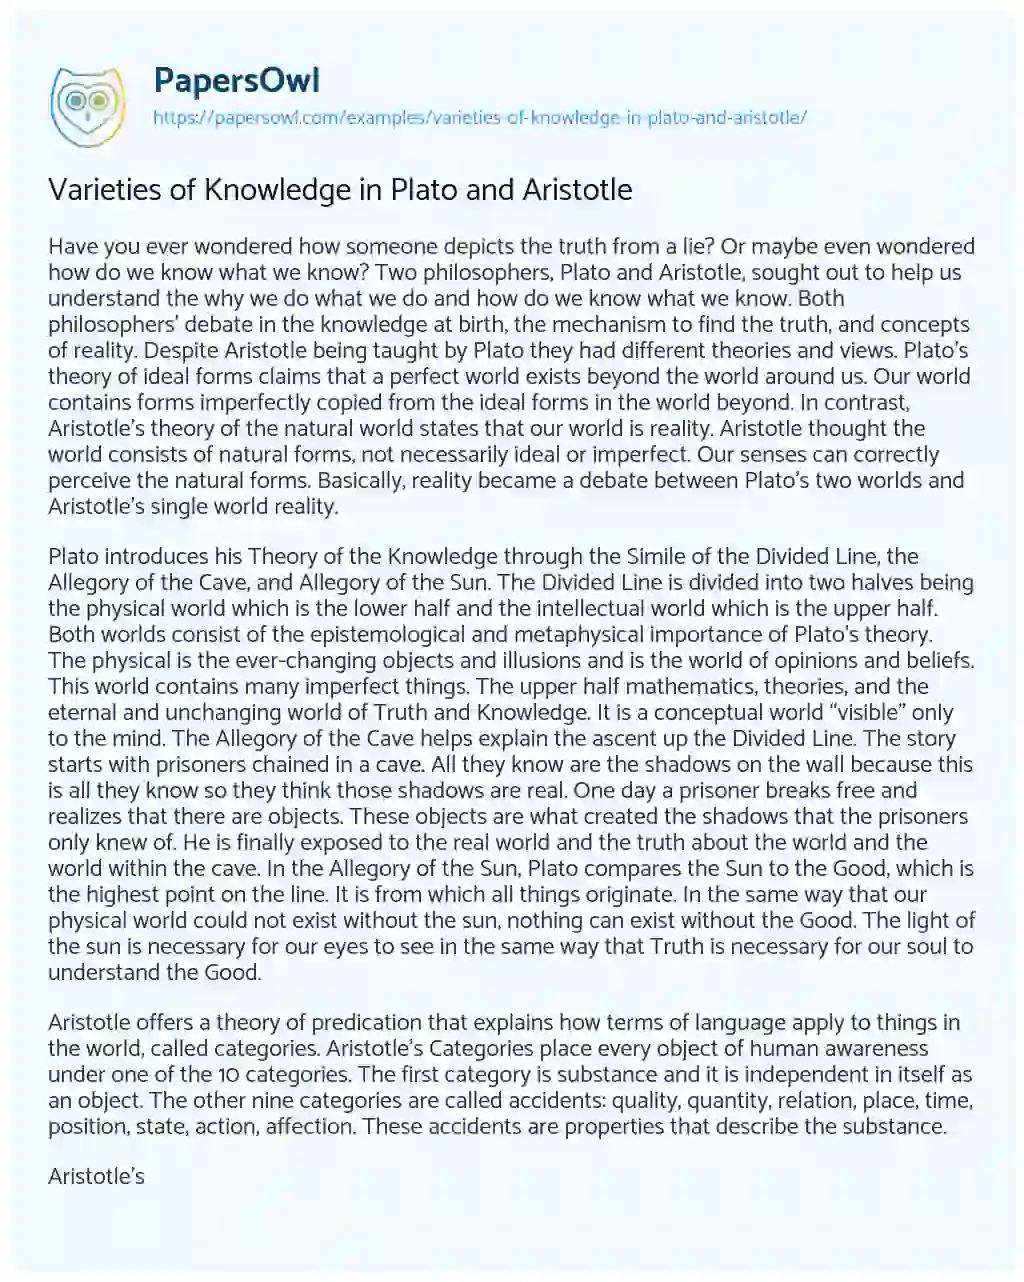 Essay on Varieties of Knowledge in Plato and Aristotle